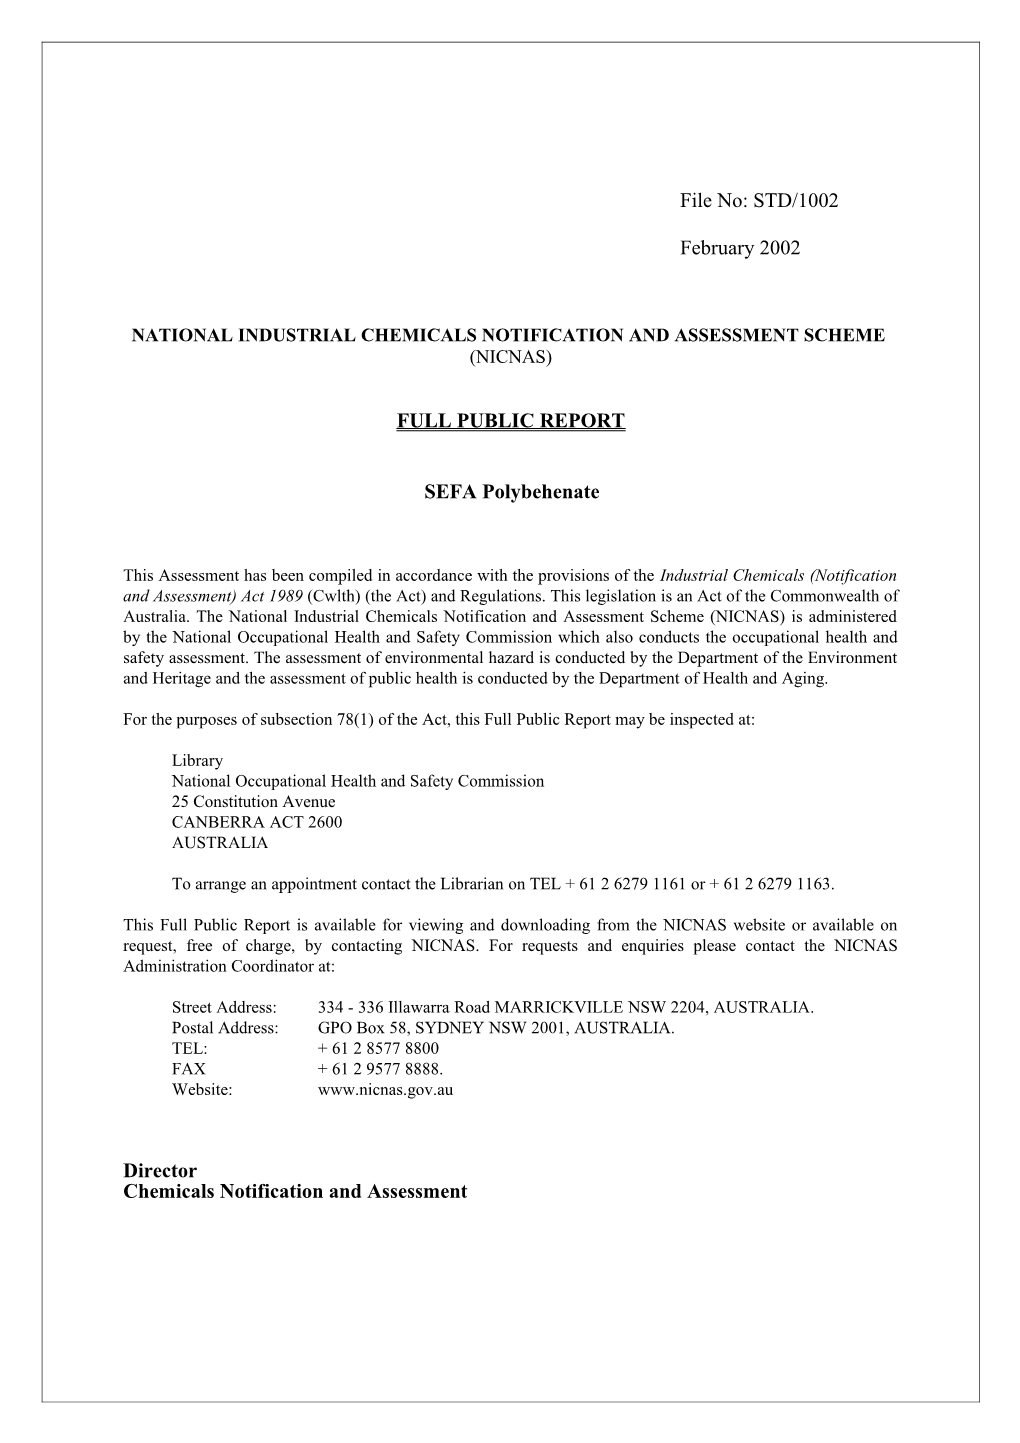 National Industrial Chemicals Notification and Assessment Scheme s19